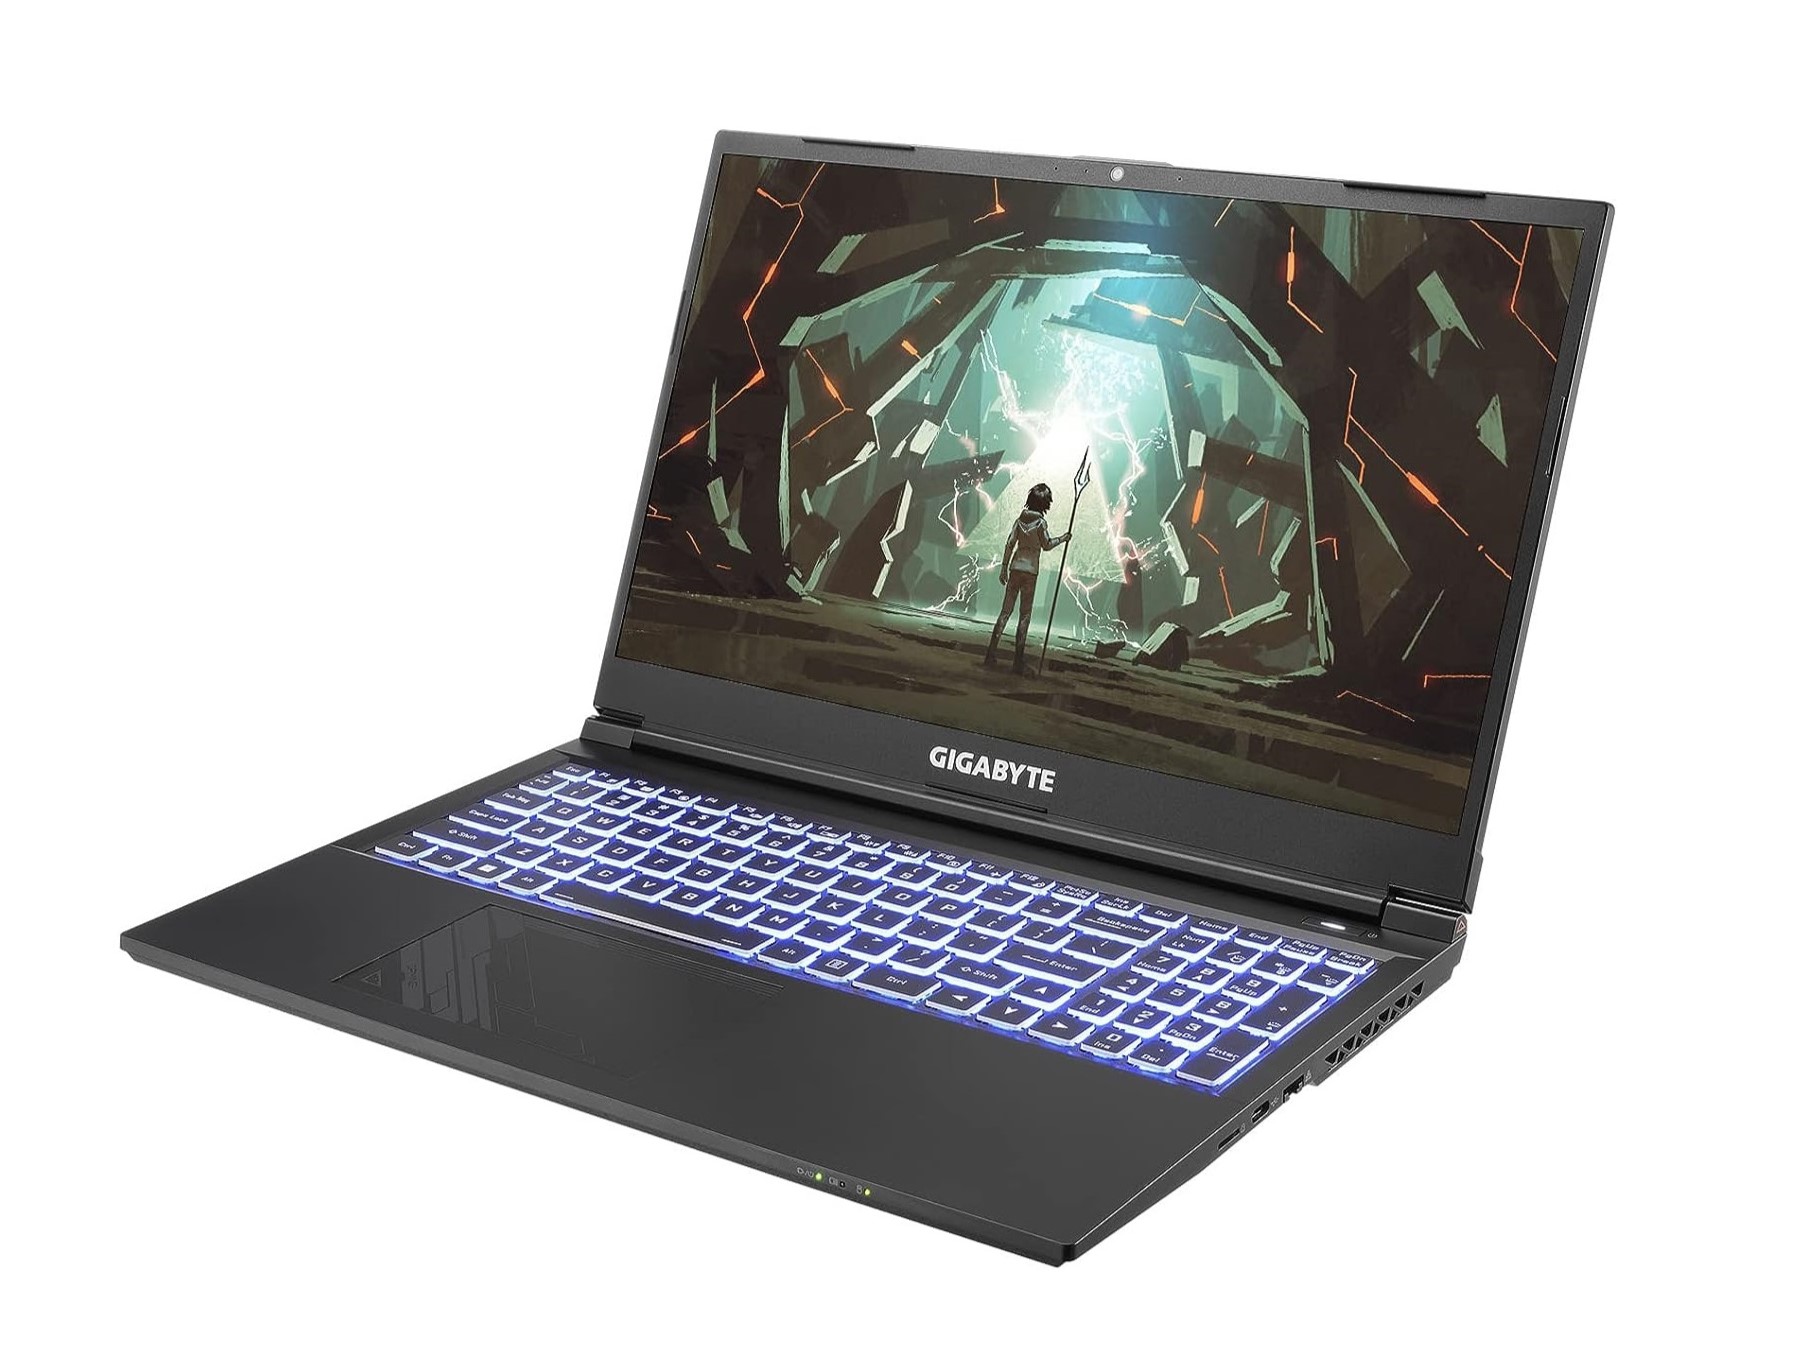 Gigabyte G5 Kf gaming laptop with 15.6 144hz screen product image.